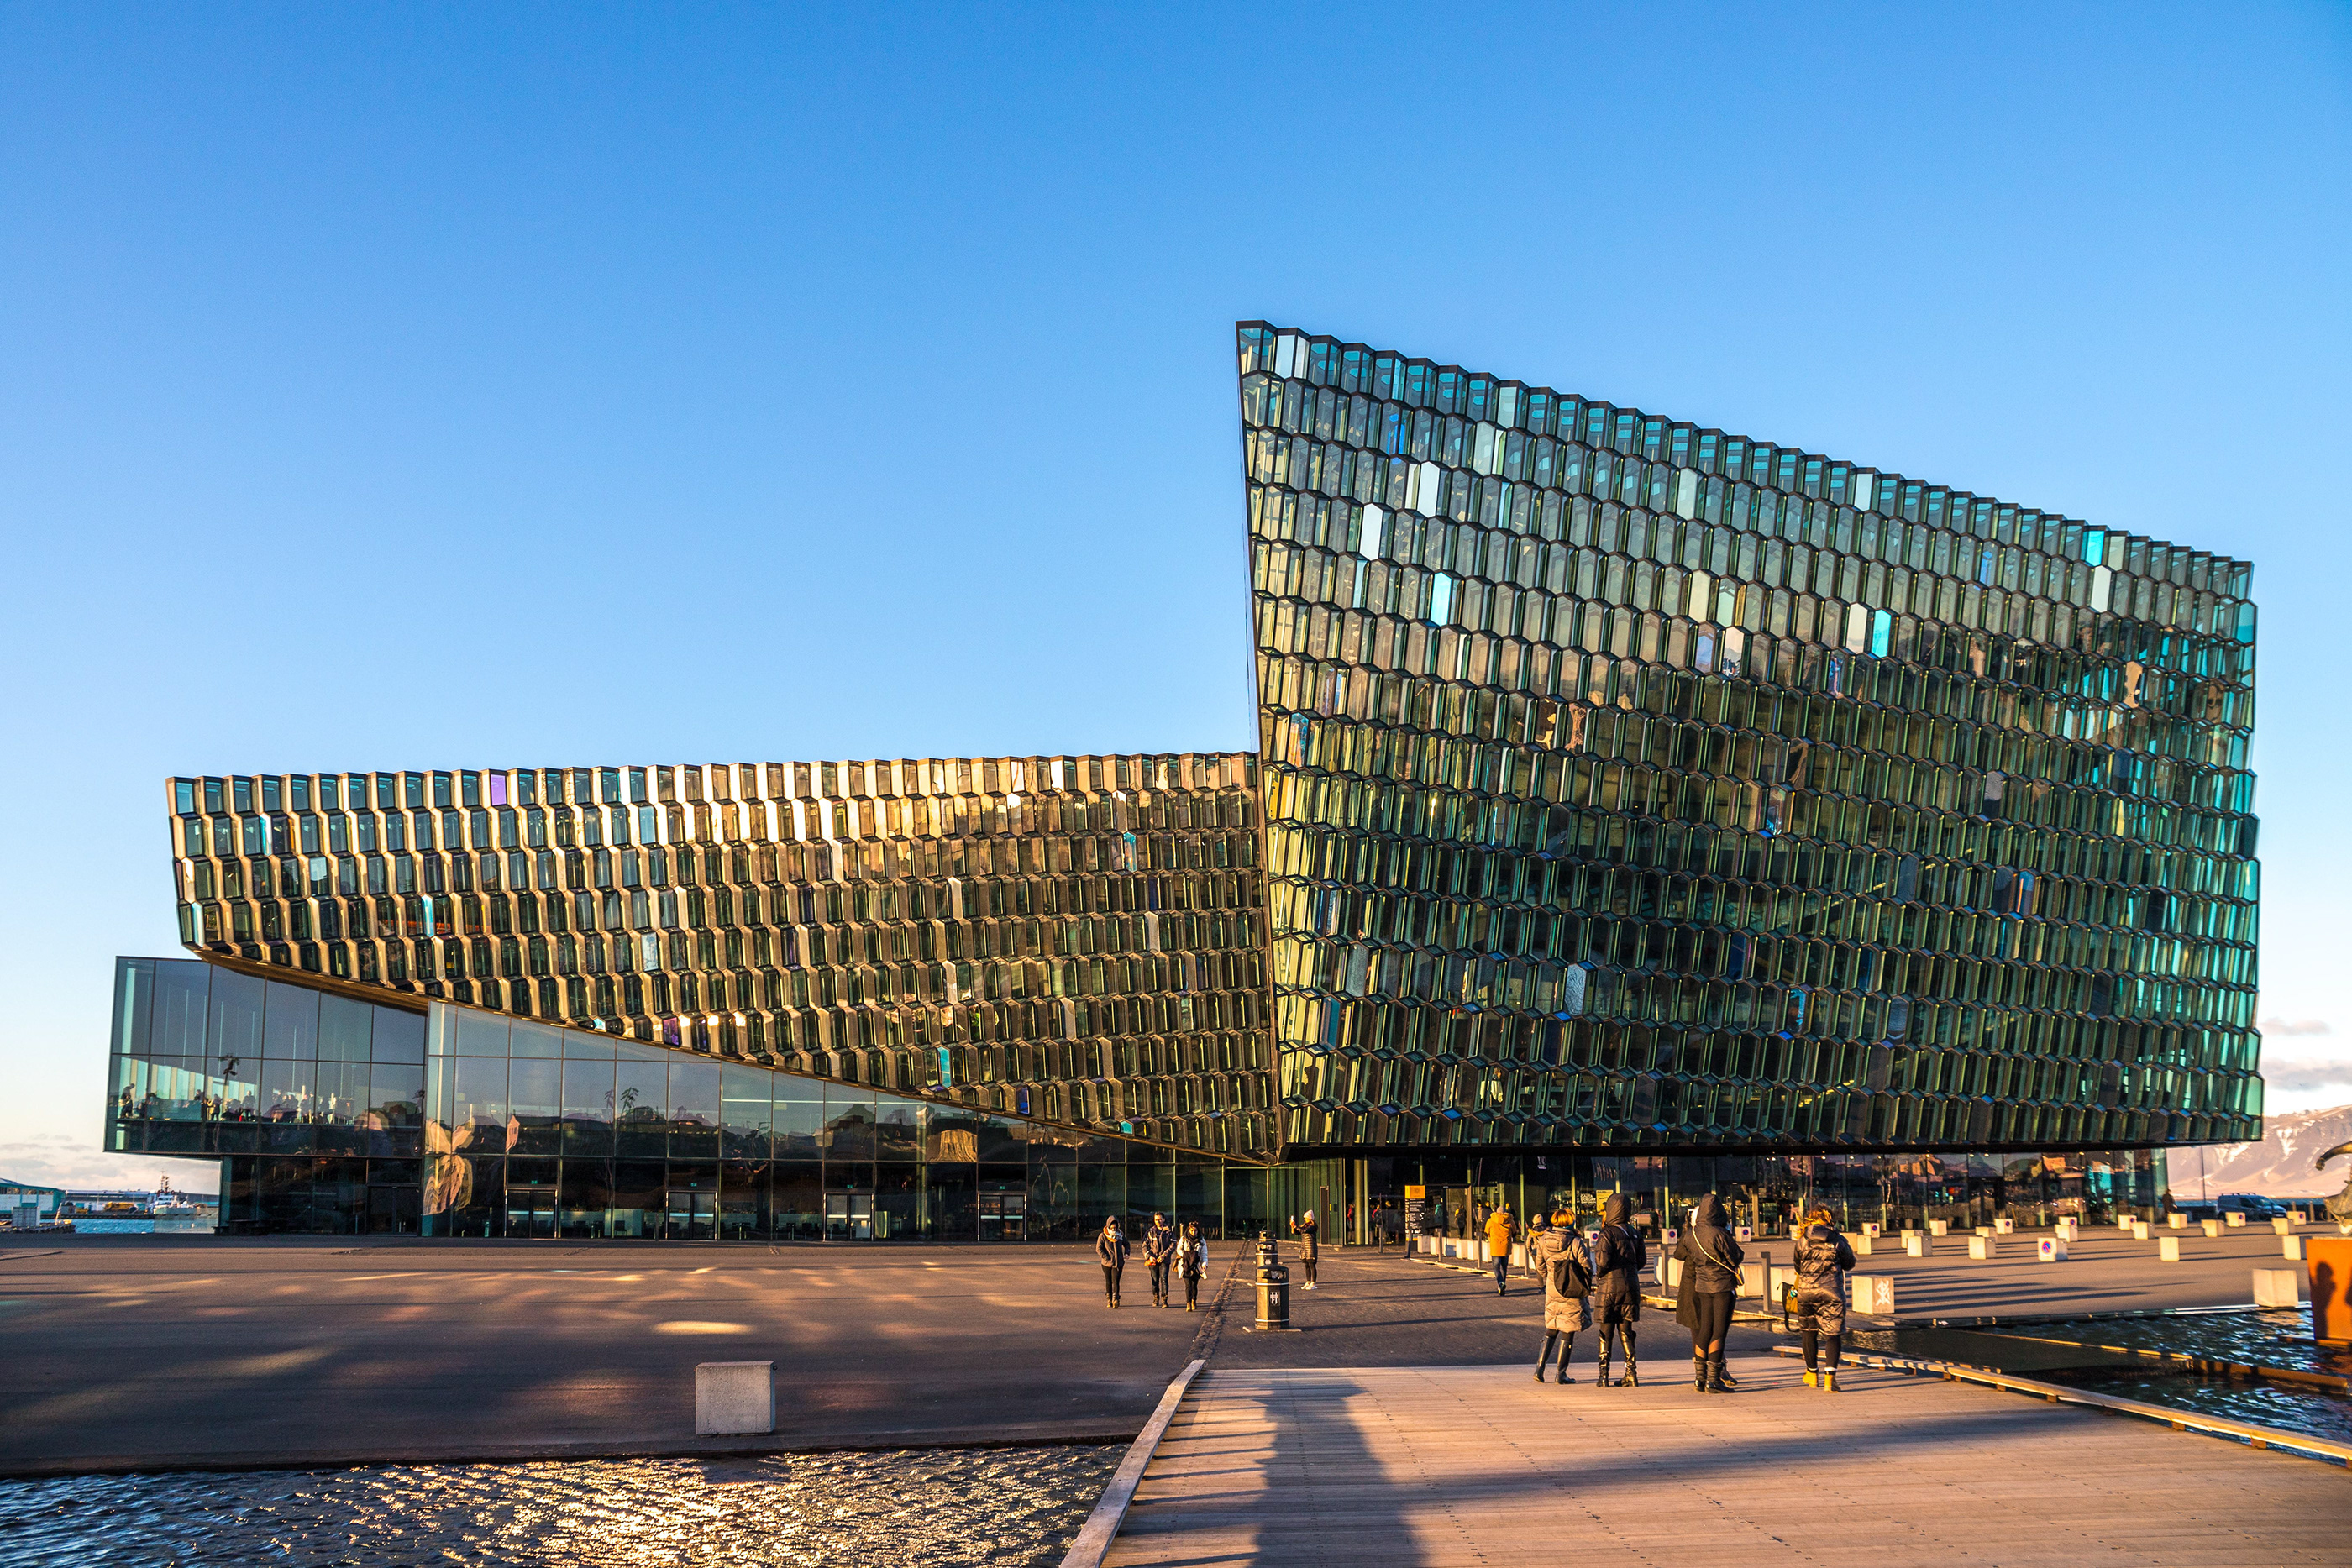 Architectural Photography: Harpa Concert Hall in Reykjavík, Iceland